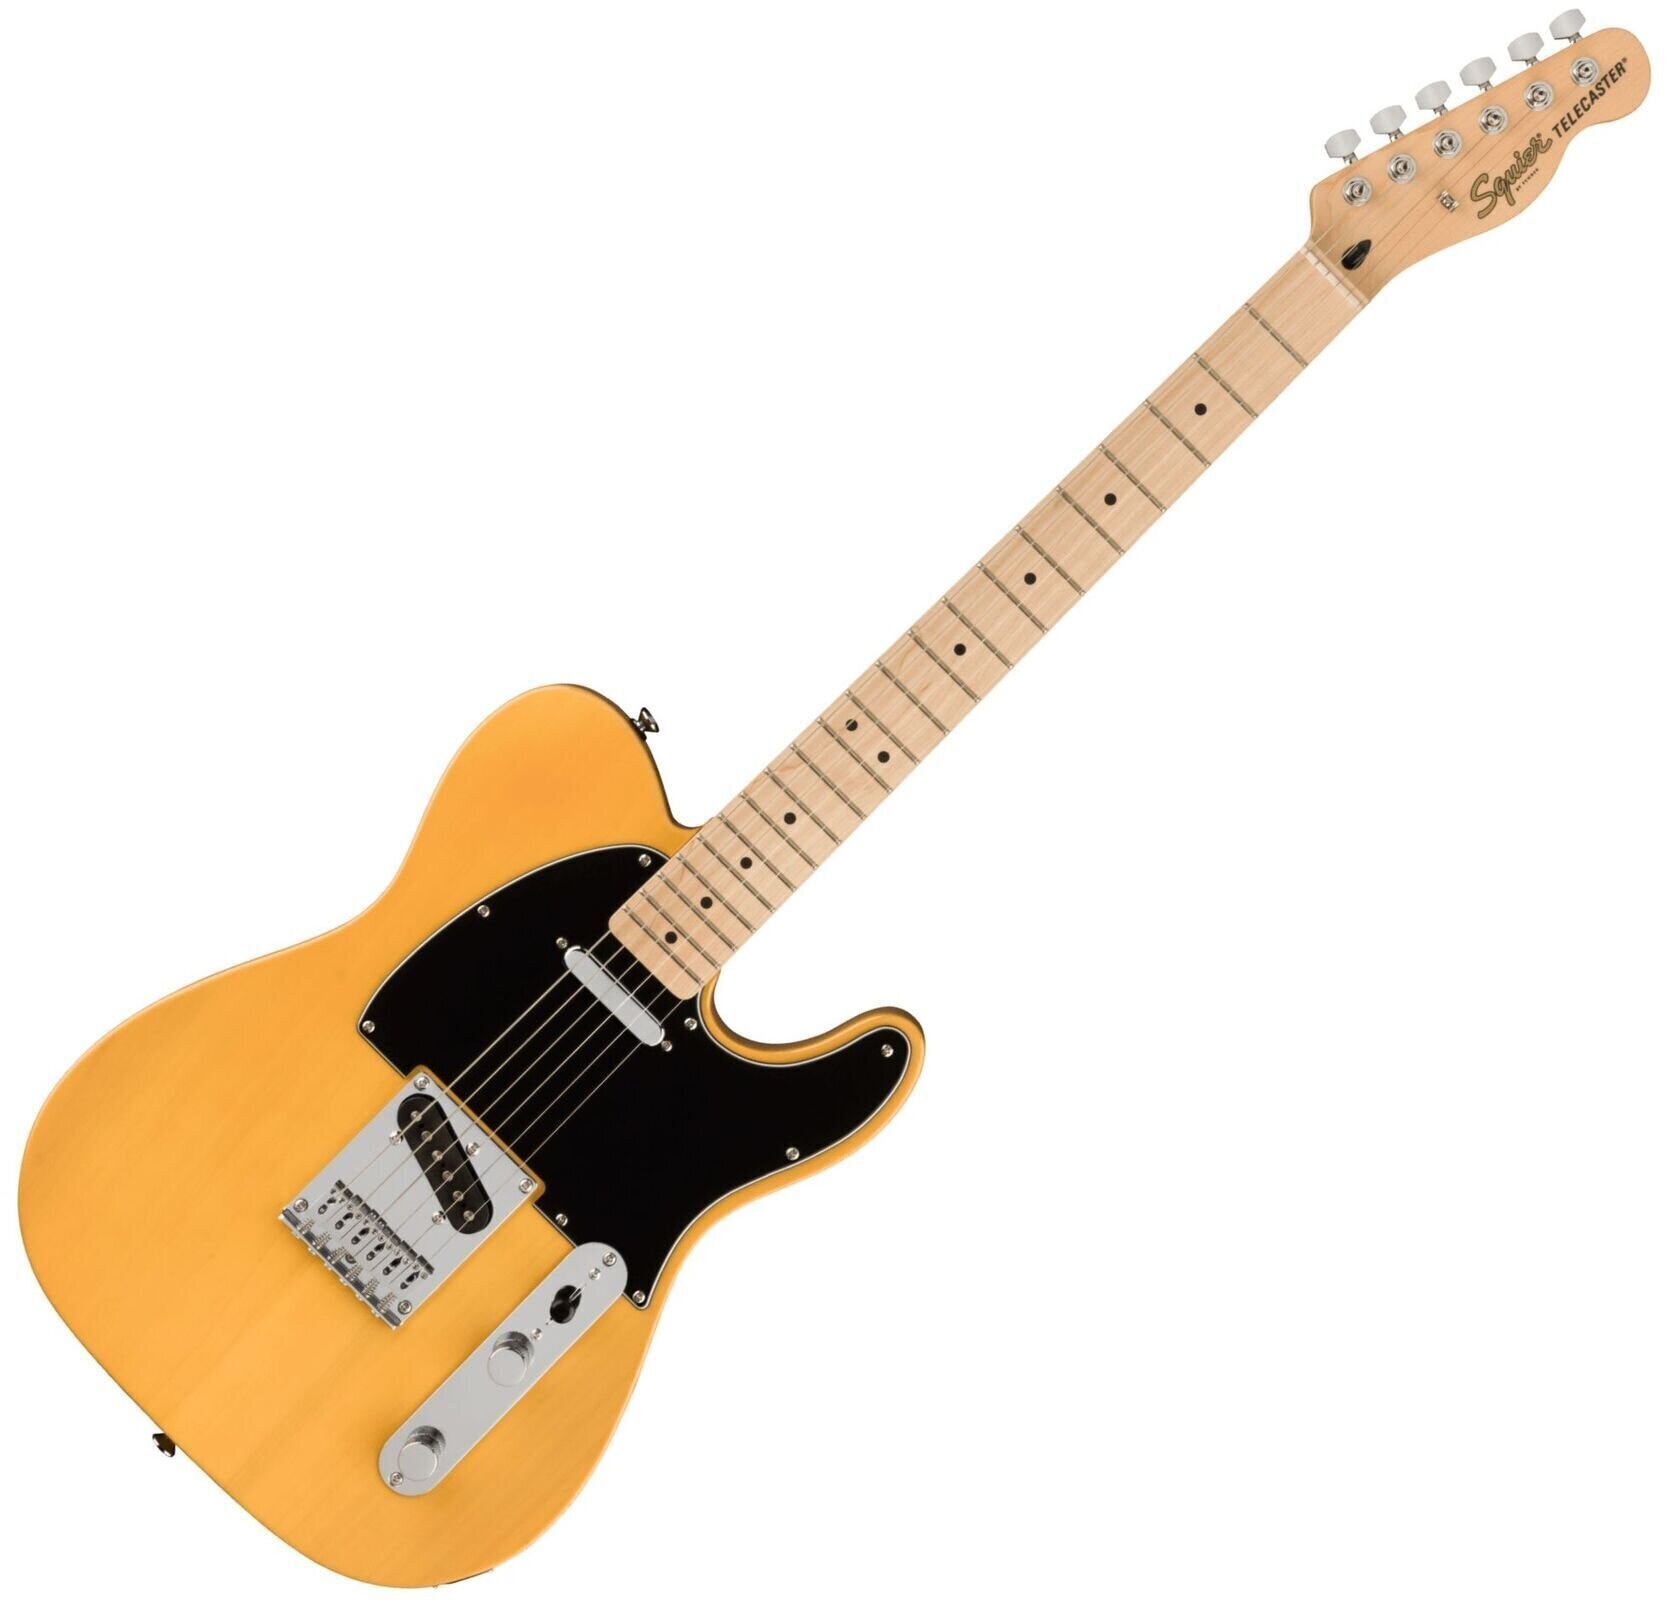 Electric guitar Fender Squier Affinity Series Telecaster MN BPG Butterscotch Blonde